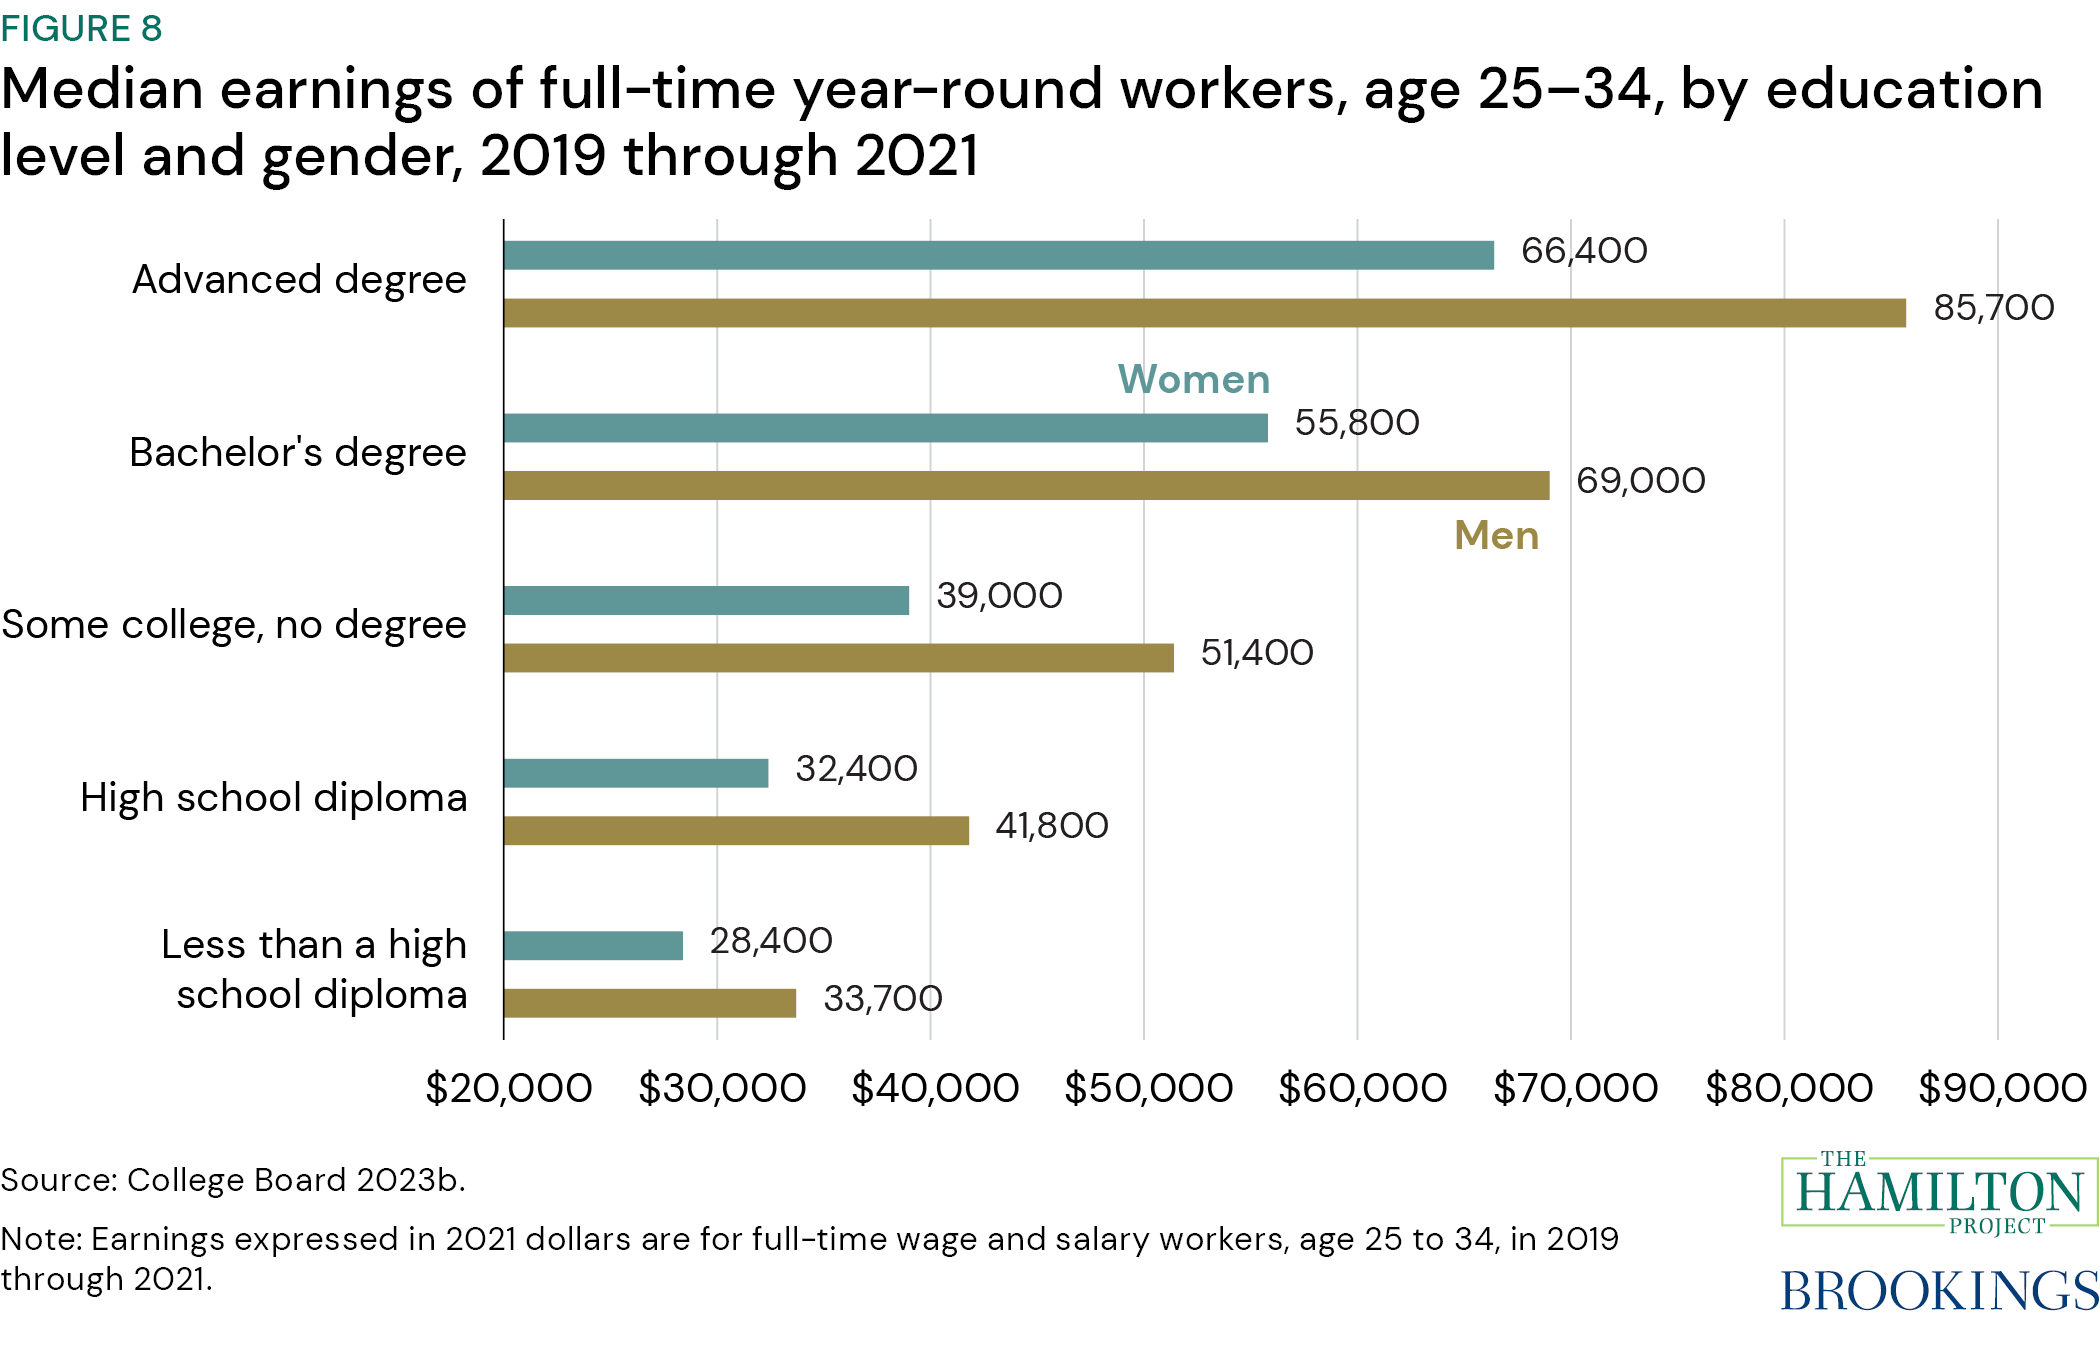 Figure 8: Median earnings of full-time year-round workers, age 25-34, by education level and gender, 2019 through 2021